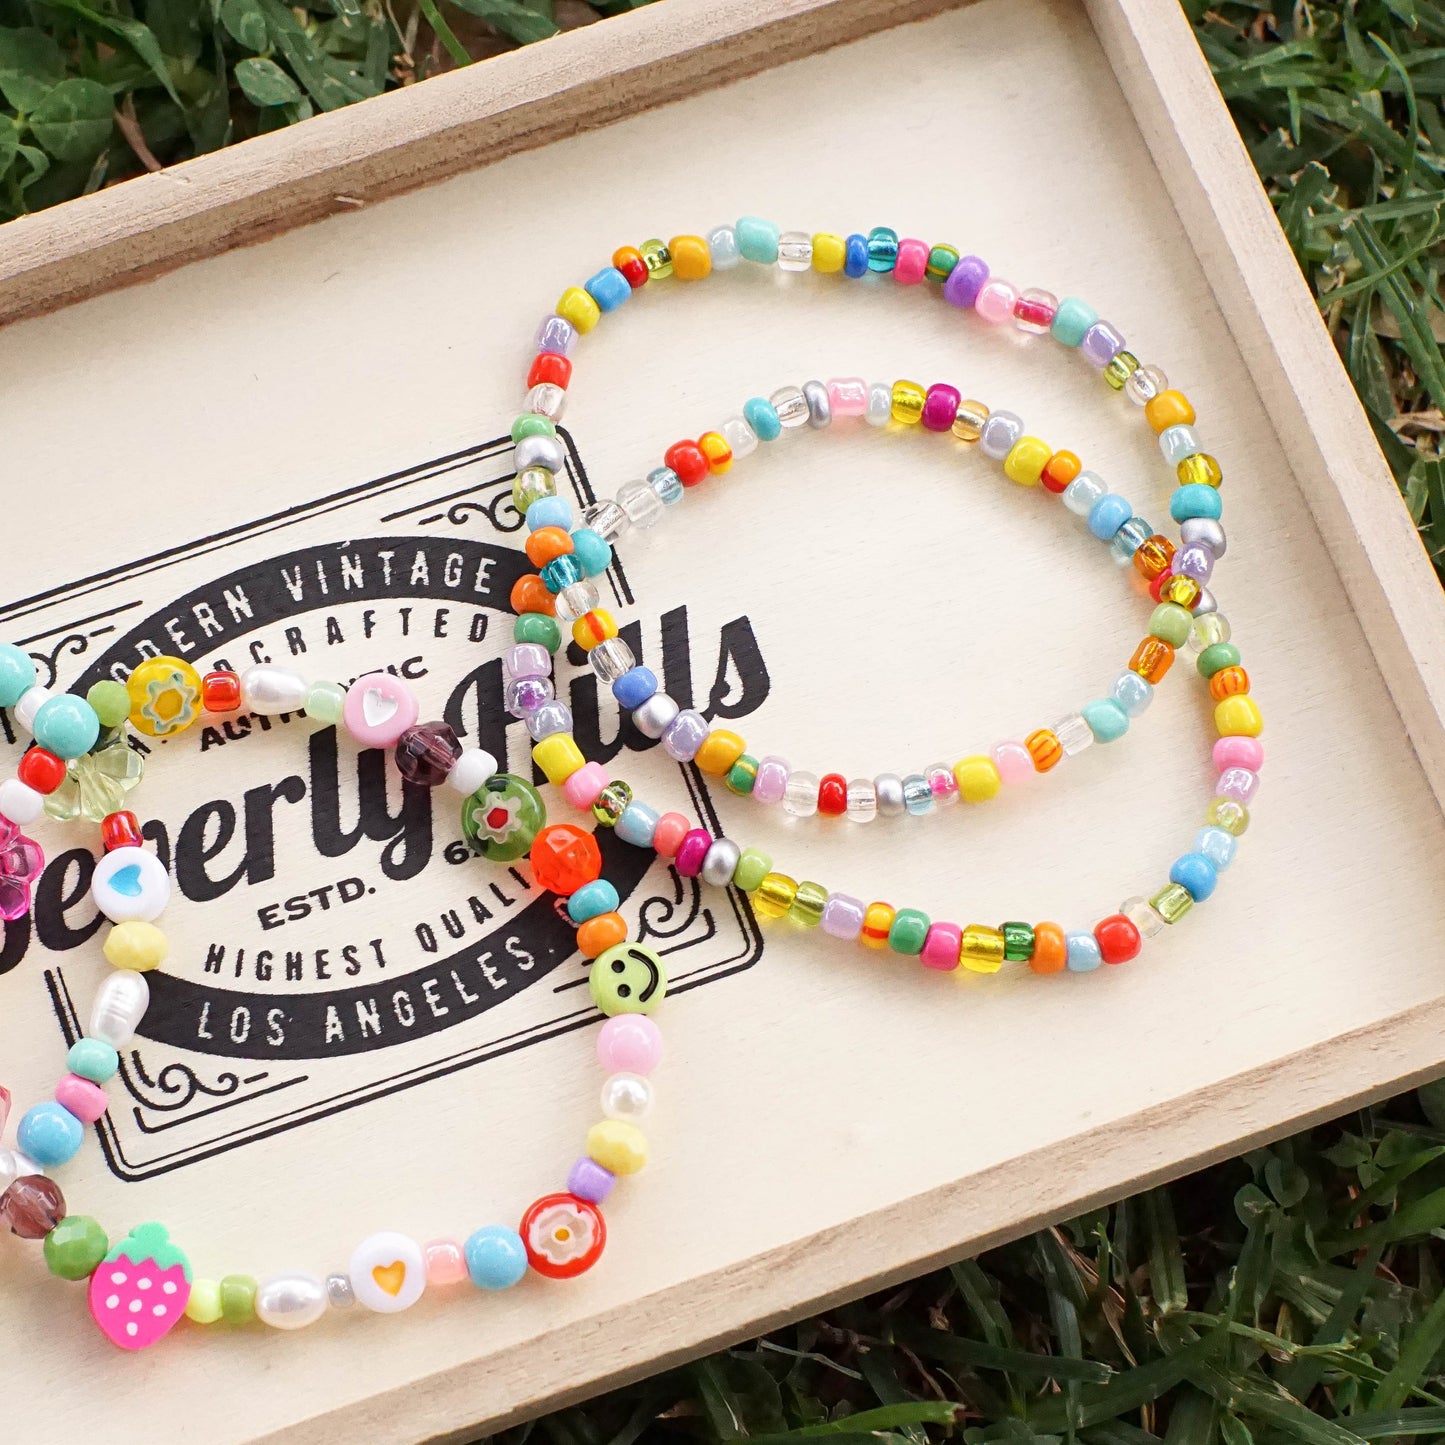 Mixed Beads Bracelet - HOW COLORFUL